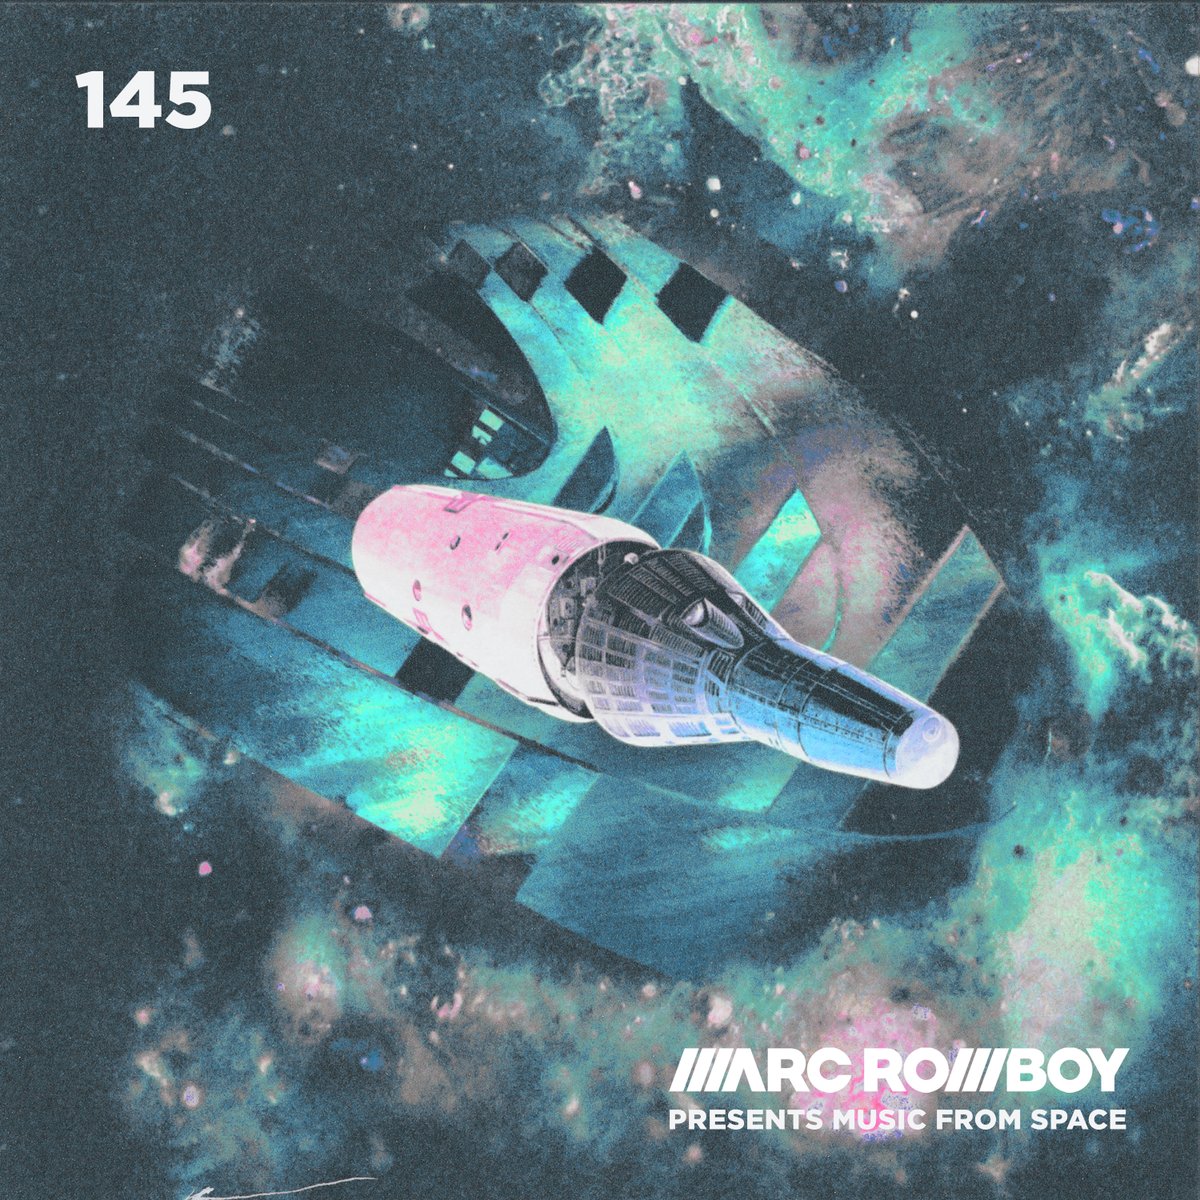 #onair at 19:00cet @marcromboy Muisc from #Space - with #newmusic by Gregor Tresher, Sven Väth, Eli & Fur, Oliver Huntemann, Joyce Muniz. #TuneIn bit.ly/3ZVGest